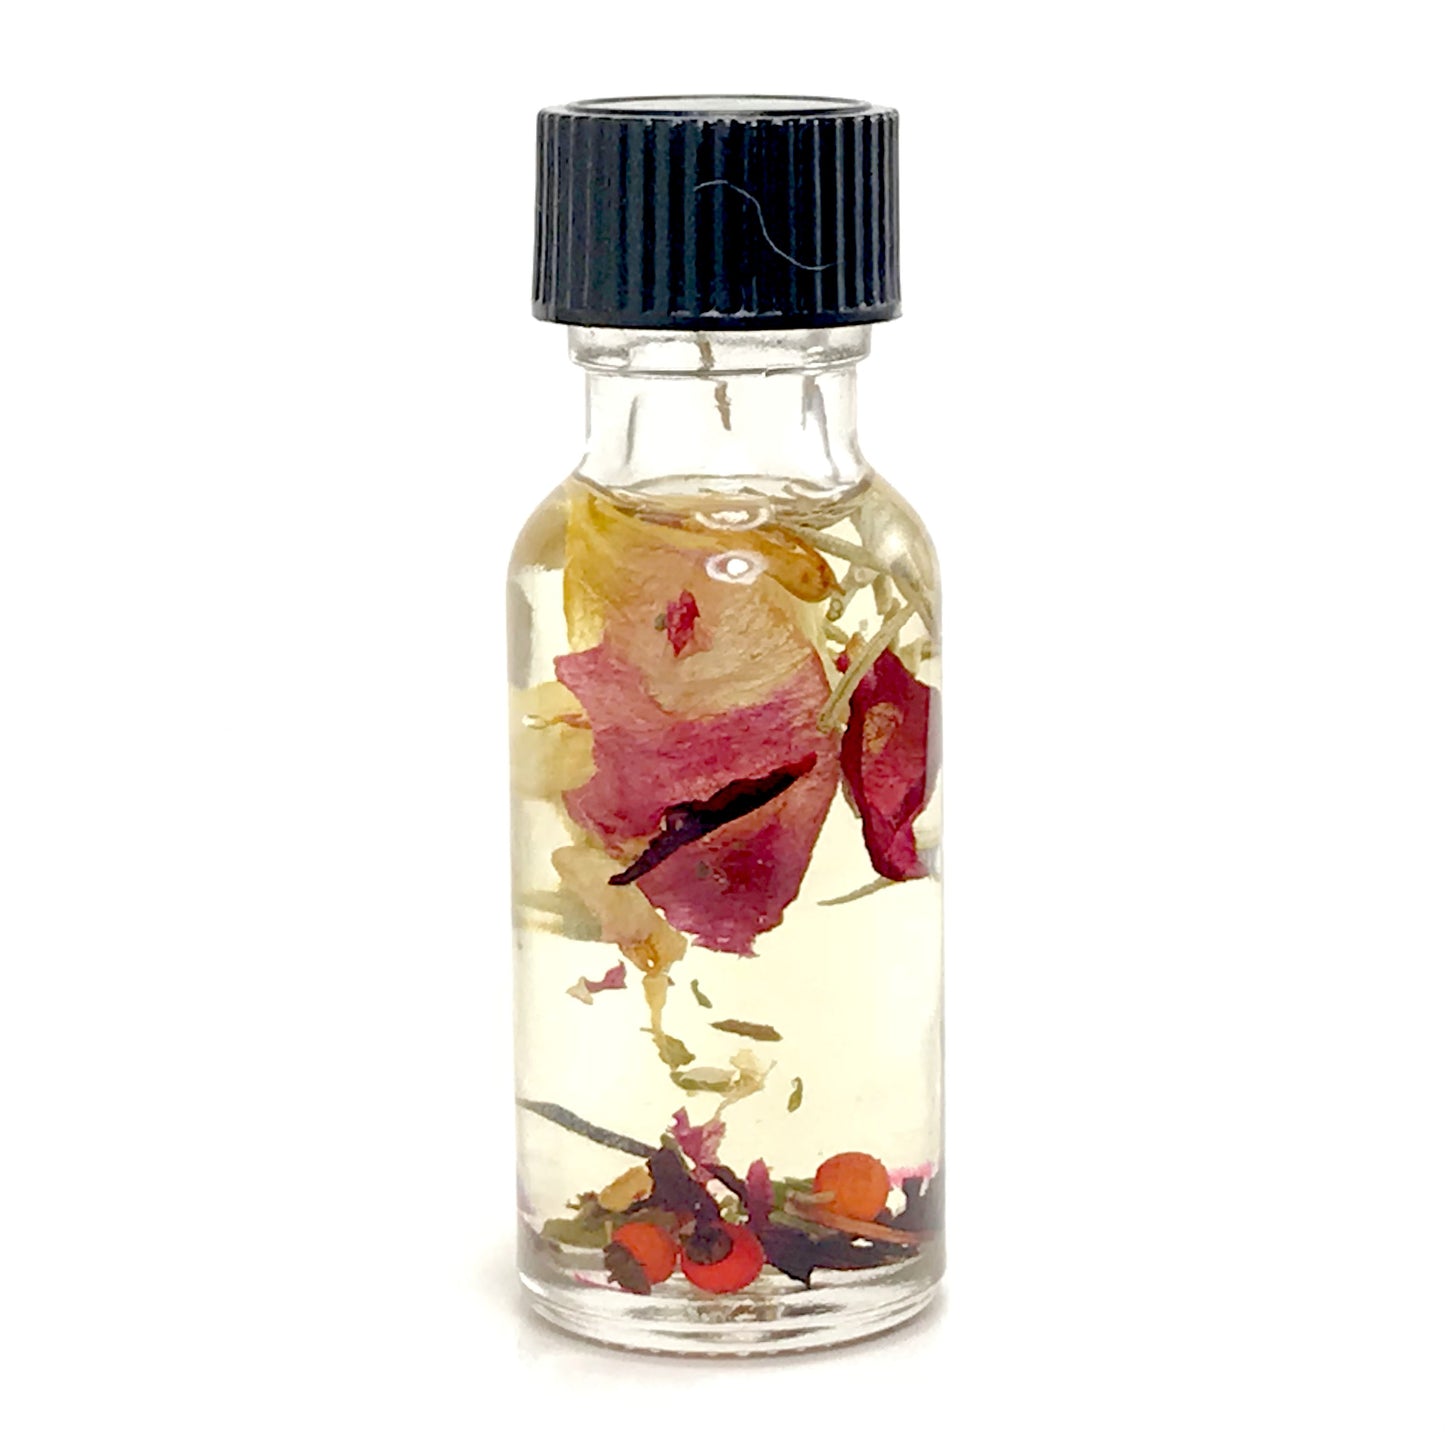 Twichery's Chuparrosa Oil is for fidelity, long-term romantic relationships, and tender caring love forever. Excellent for candle dressing, bath rituals. Hoodoo, Wicca, Santeria, Mojo, Anointing